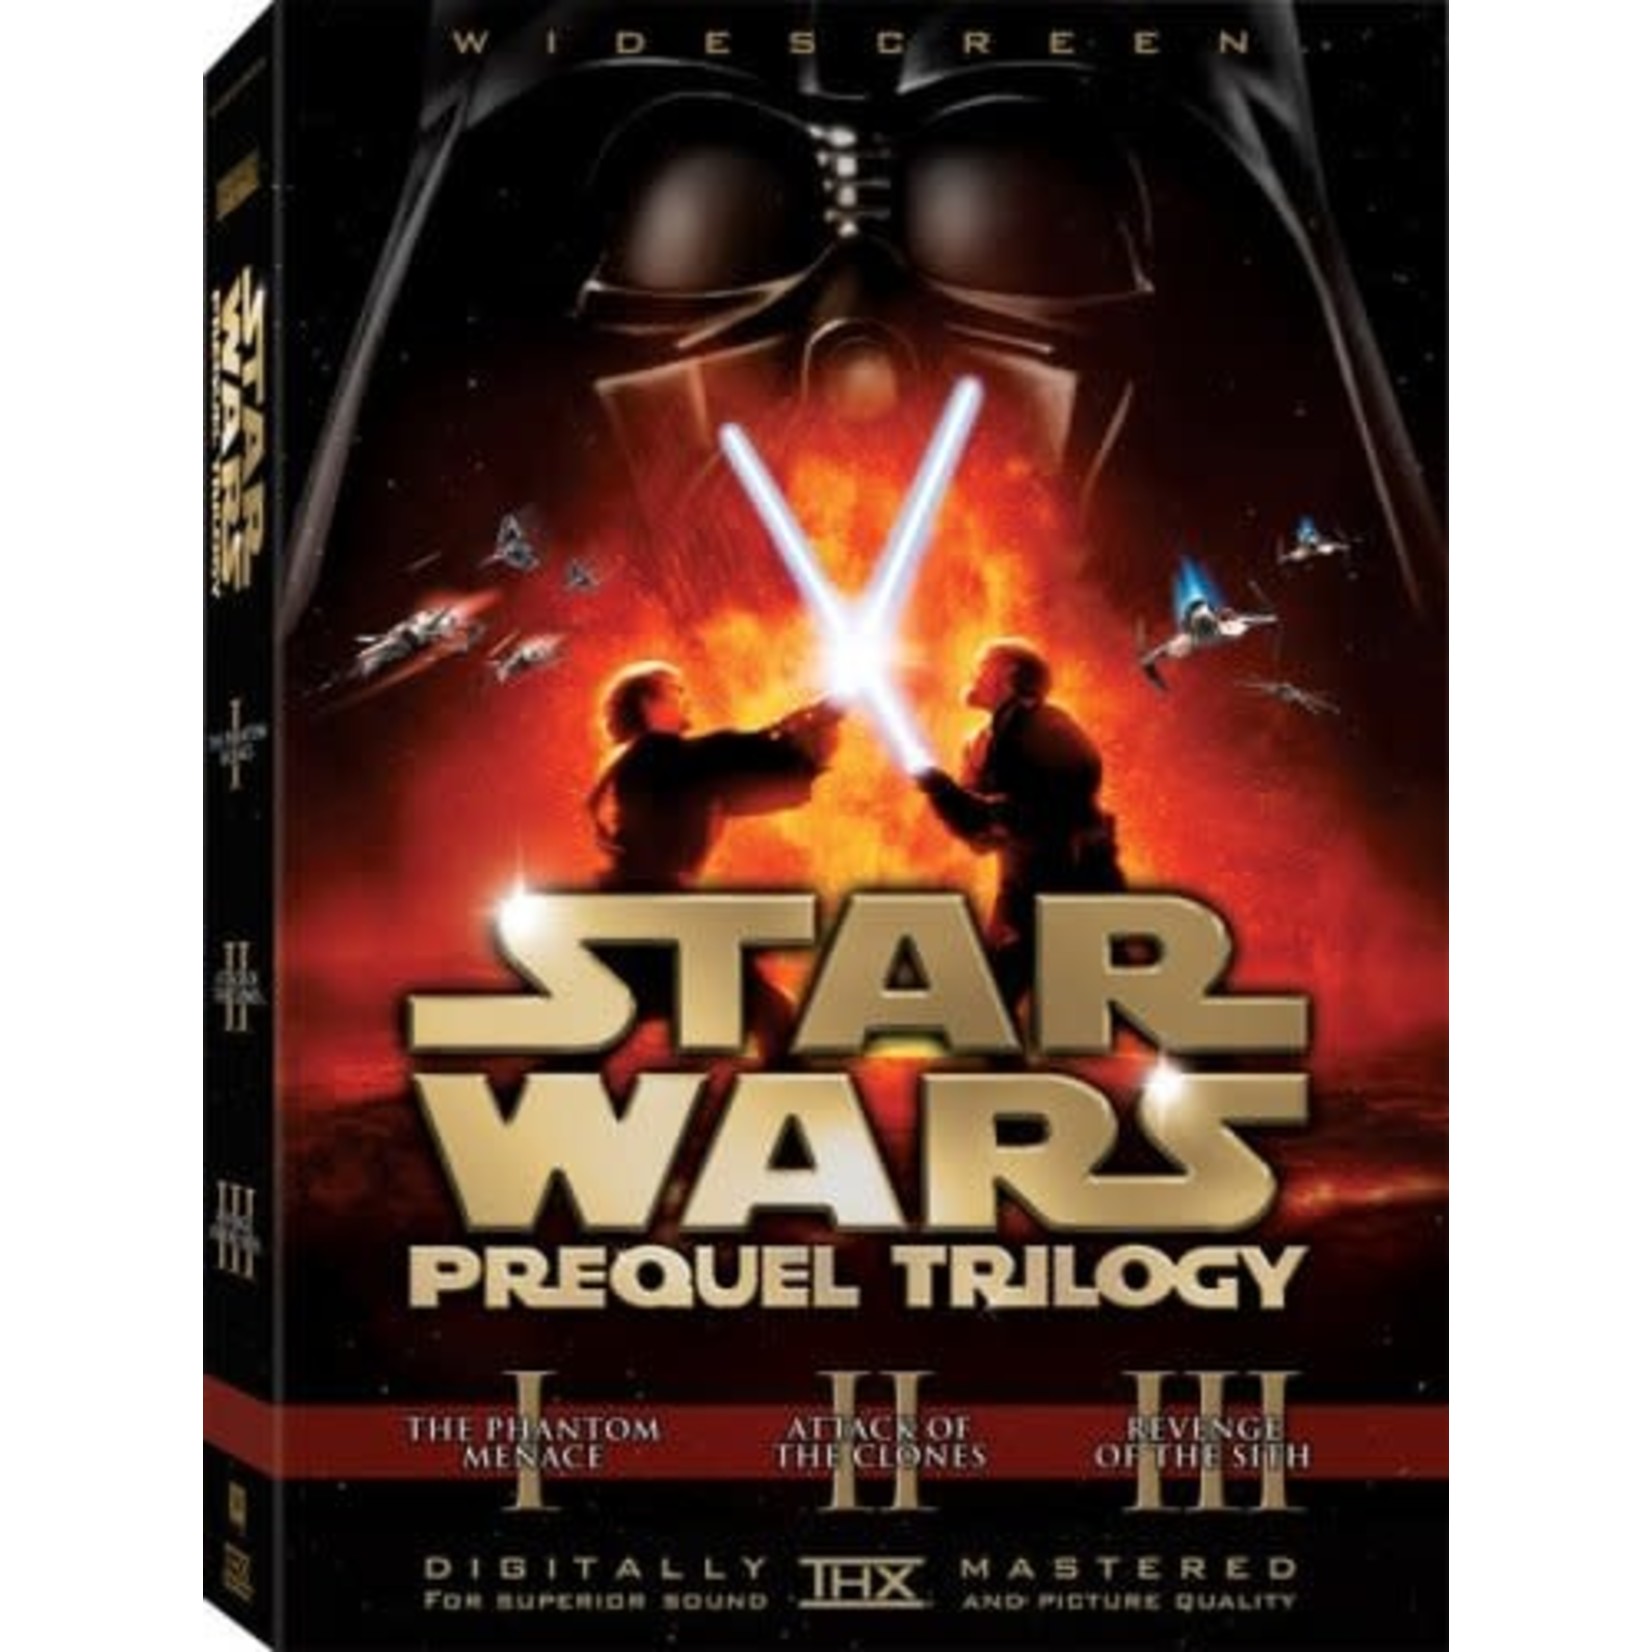 Star Wars - Episodes I-III: The Prequel Trilogy [USED 6DVD]